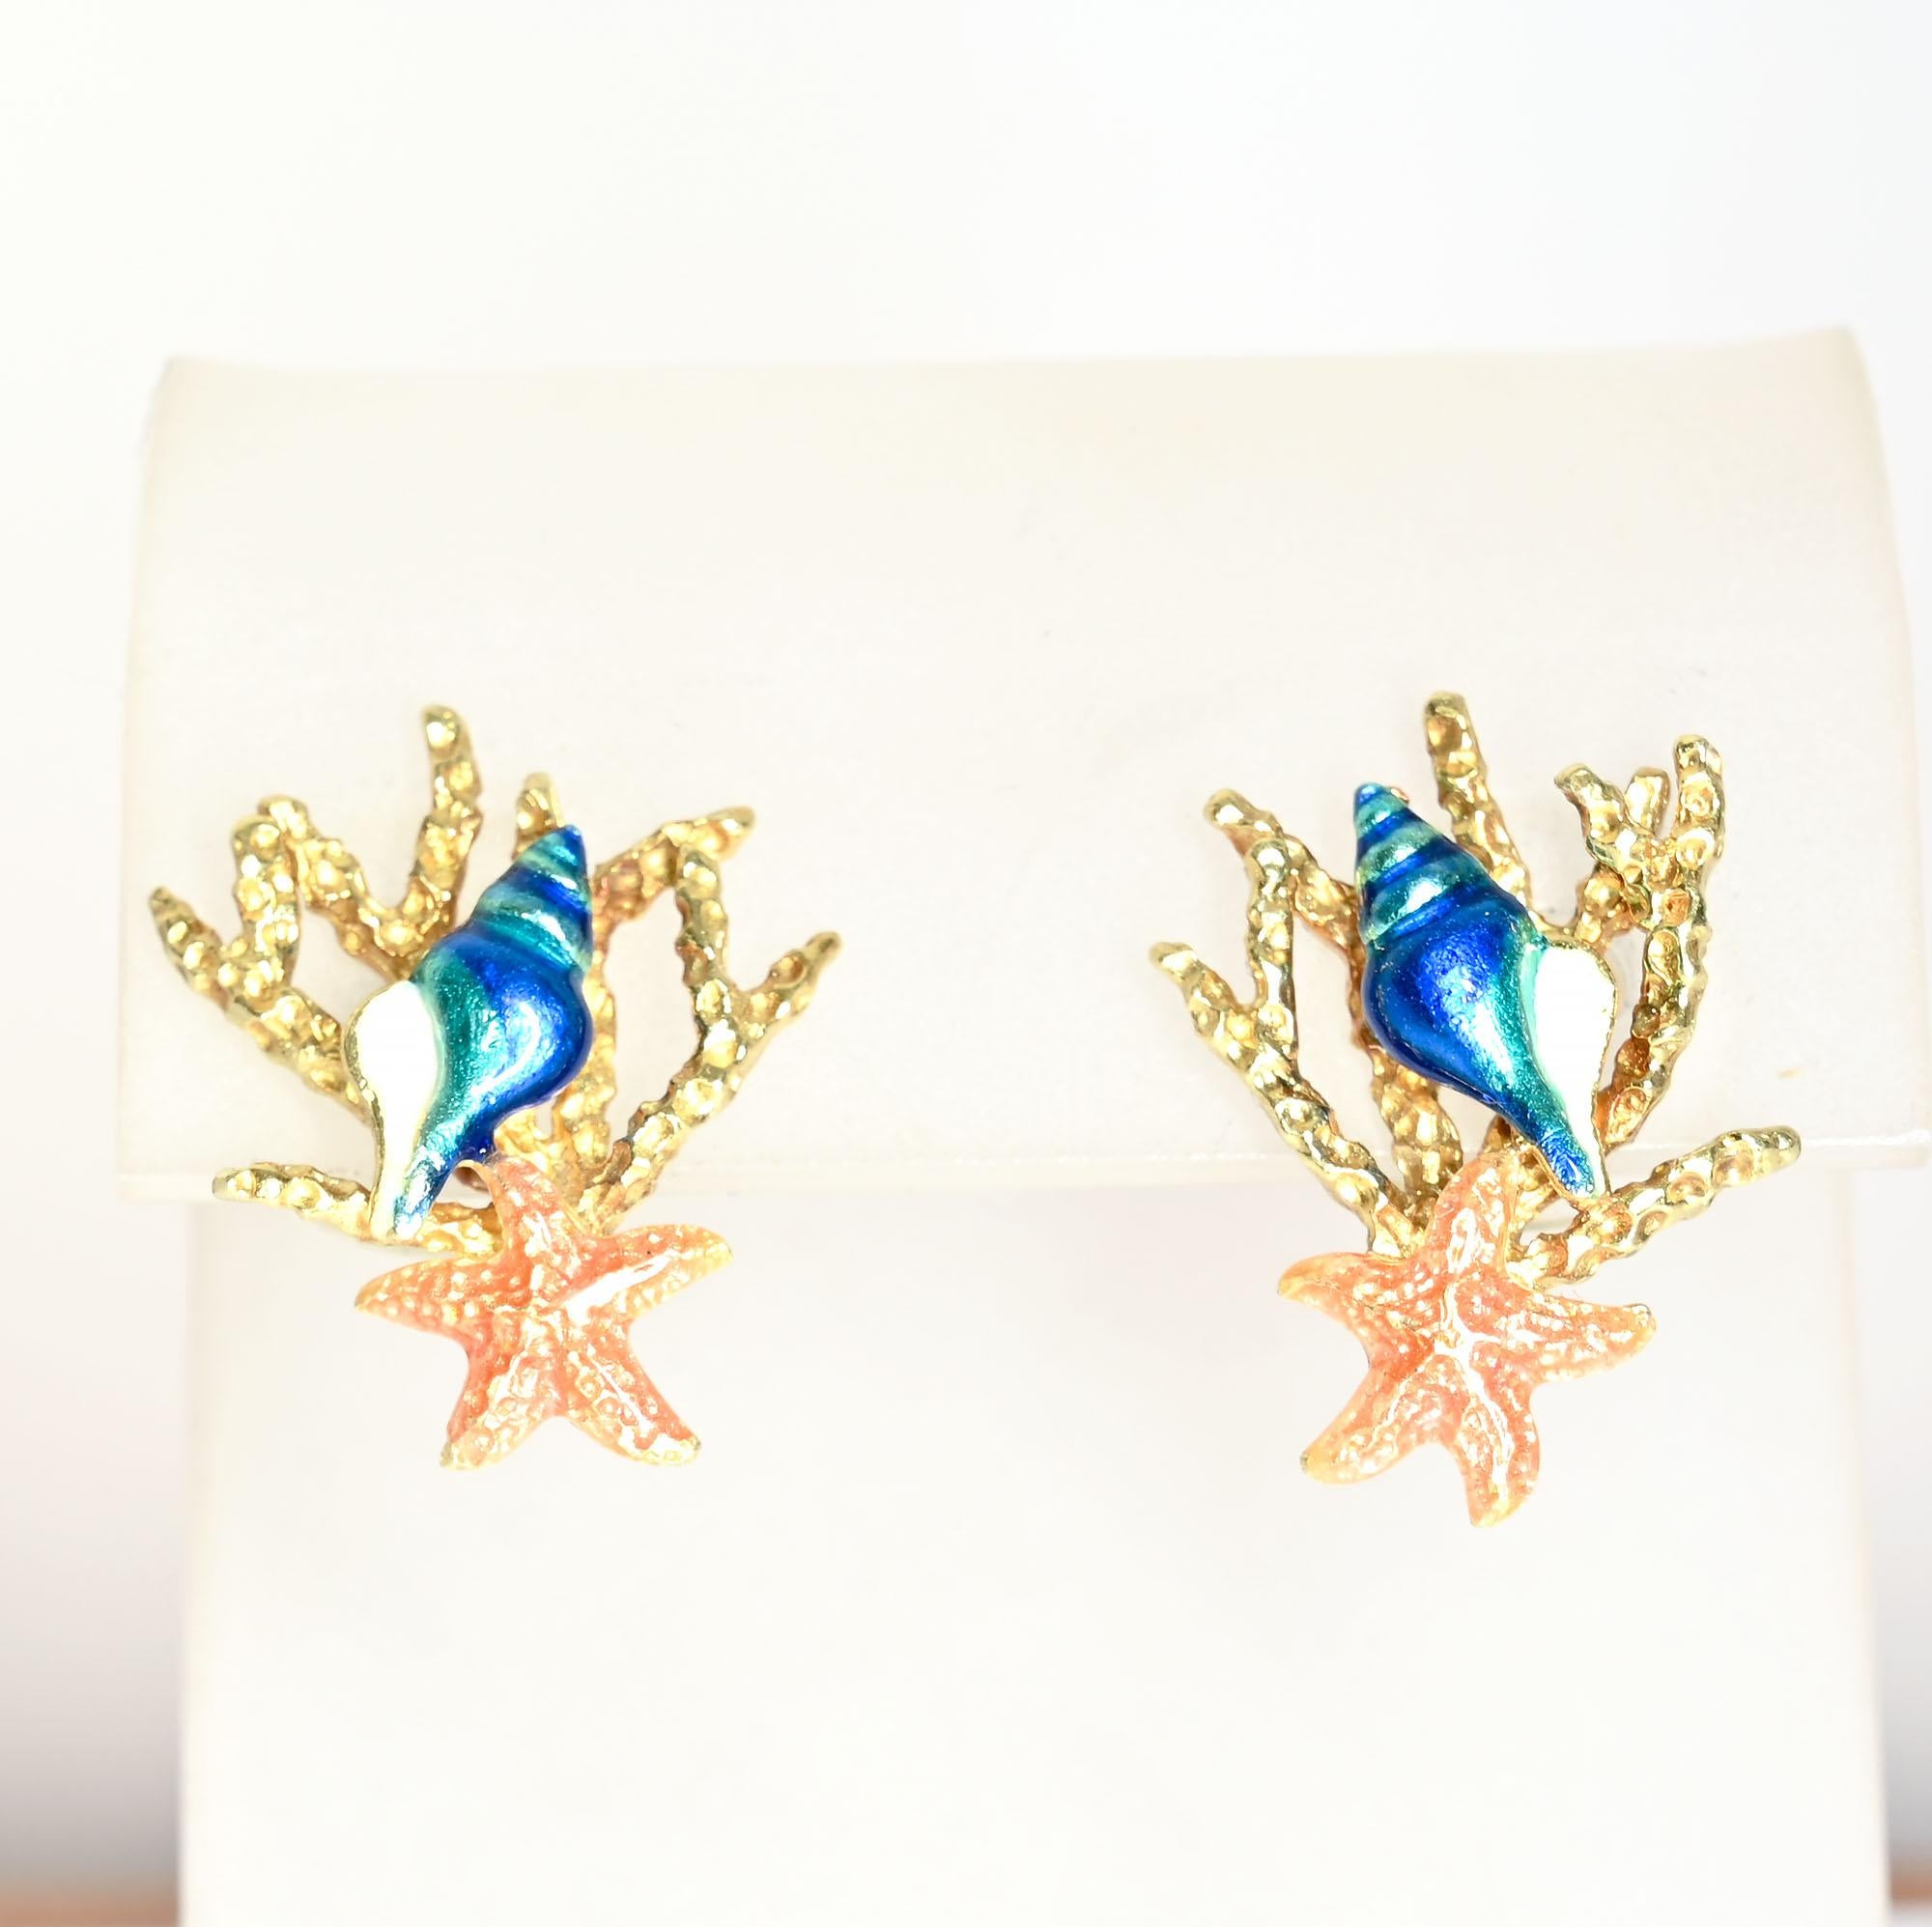 Beautifully made enamel earrings, each depicting a shell, starfish and coral. They are made by Kabana in New Mexico. The metal is 18 karat gold. Suitable for post backs. The earrings measure 15/16